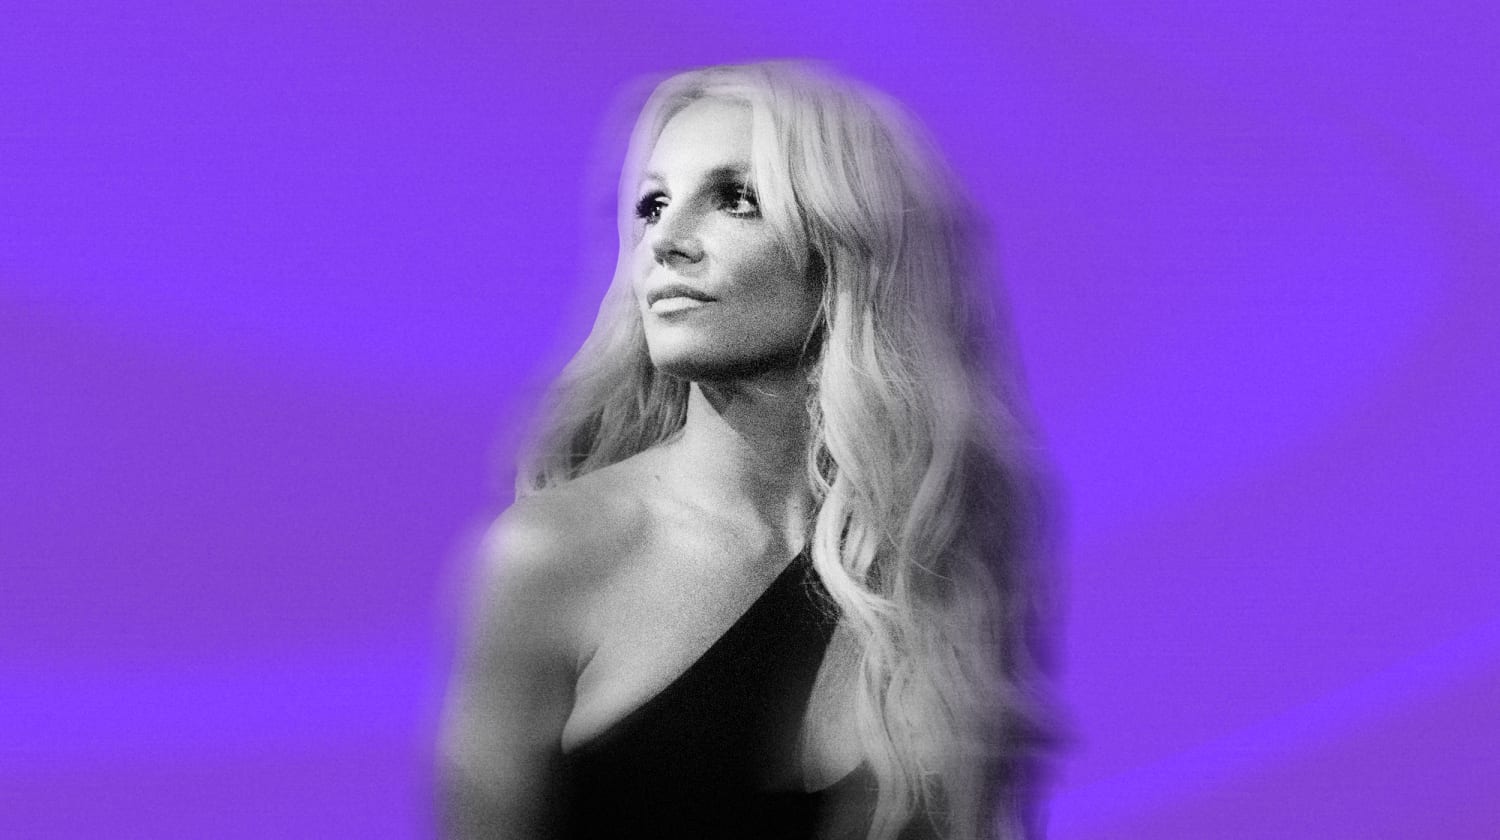 Everything You Need to Know About Britney Spears' Conservatorship Battle